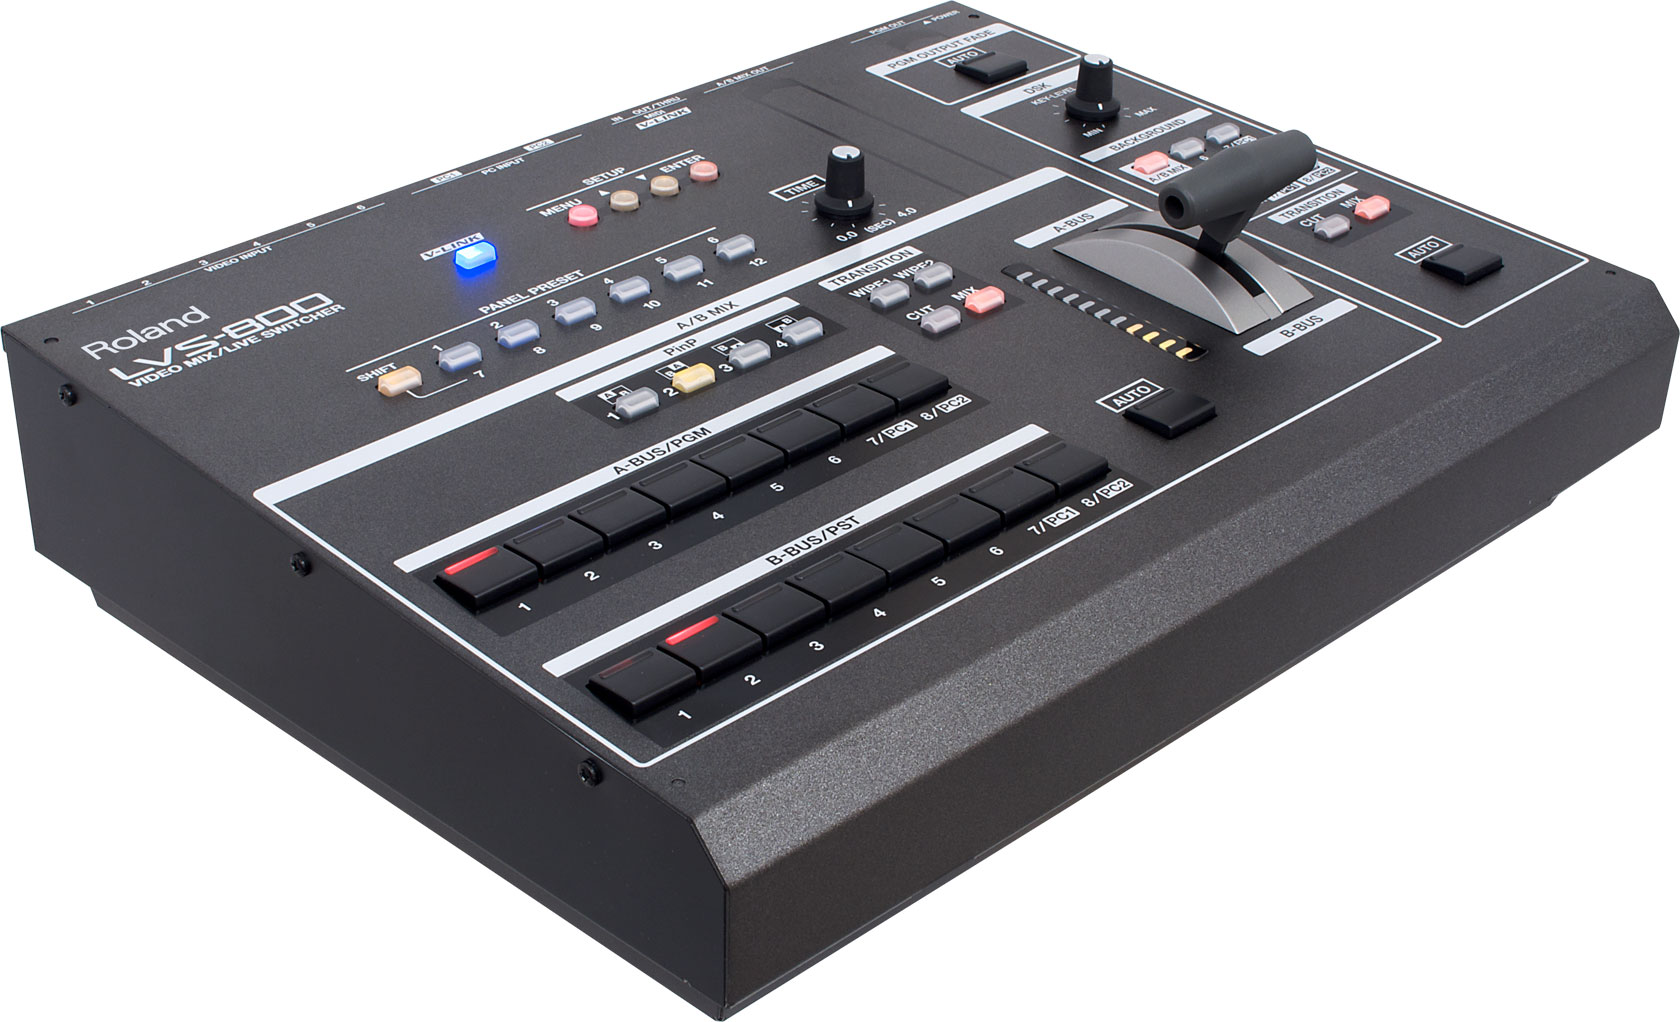 Roland Pro A/V - LVS-800 | Professional Eight-Channel Video Mixer